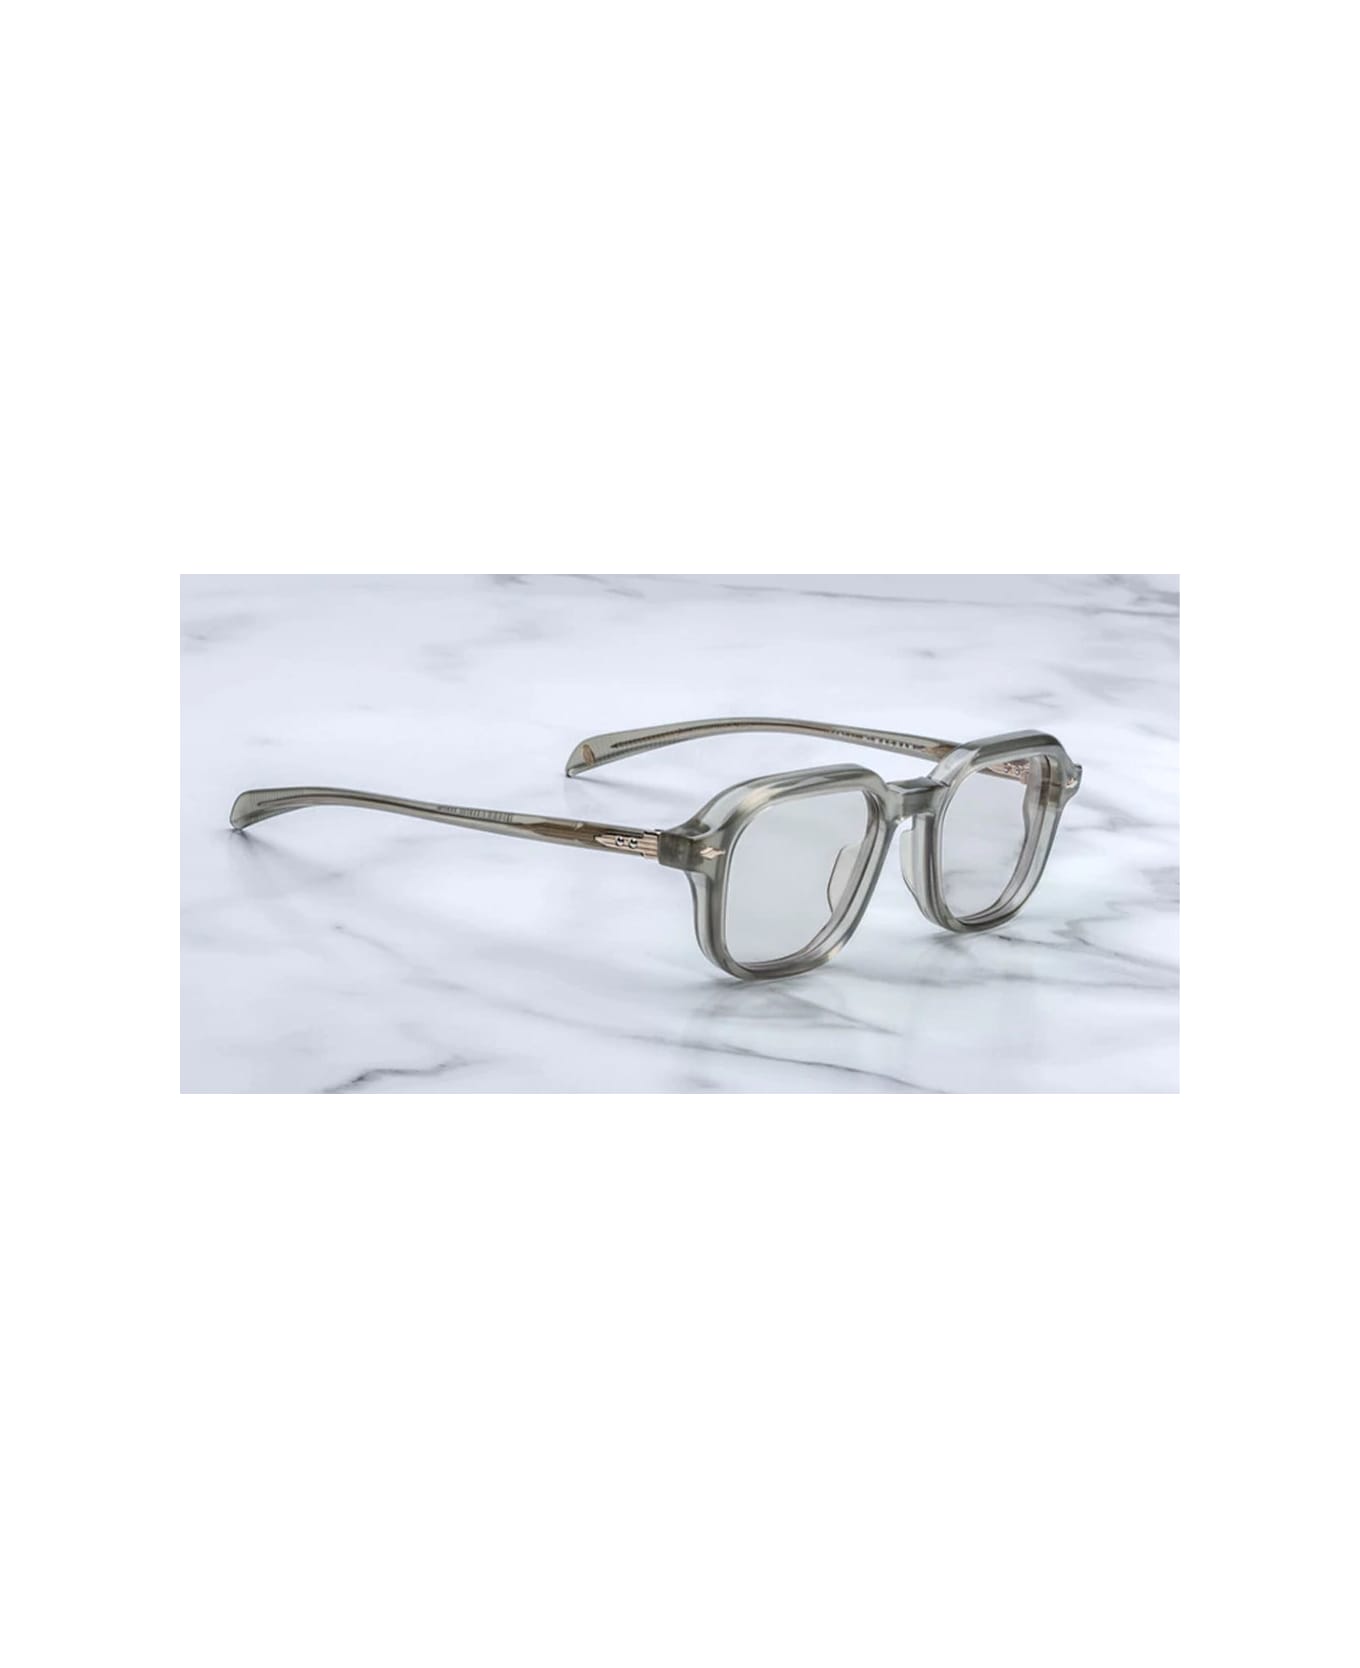 Jacques Marie Mage Wagram - Sky Grey Glasses - grey